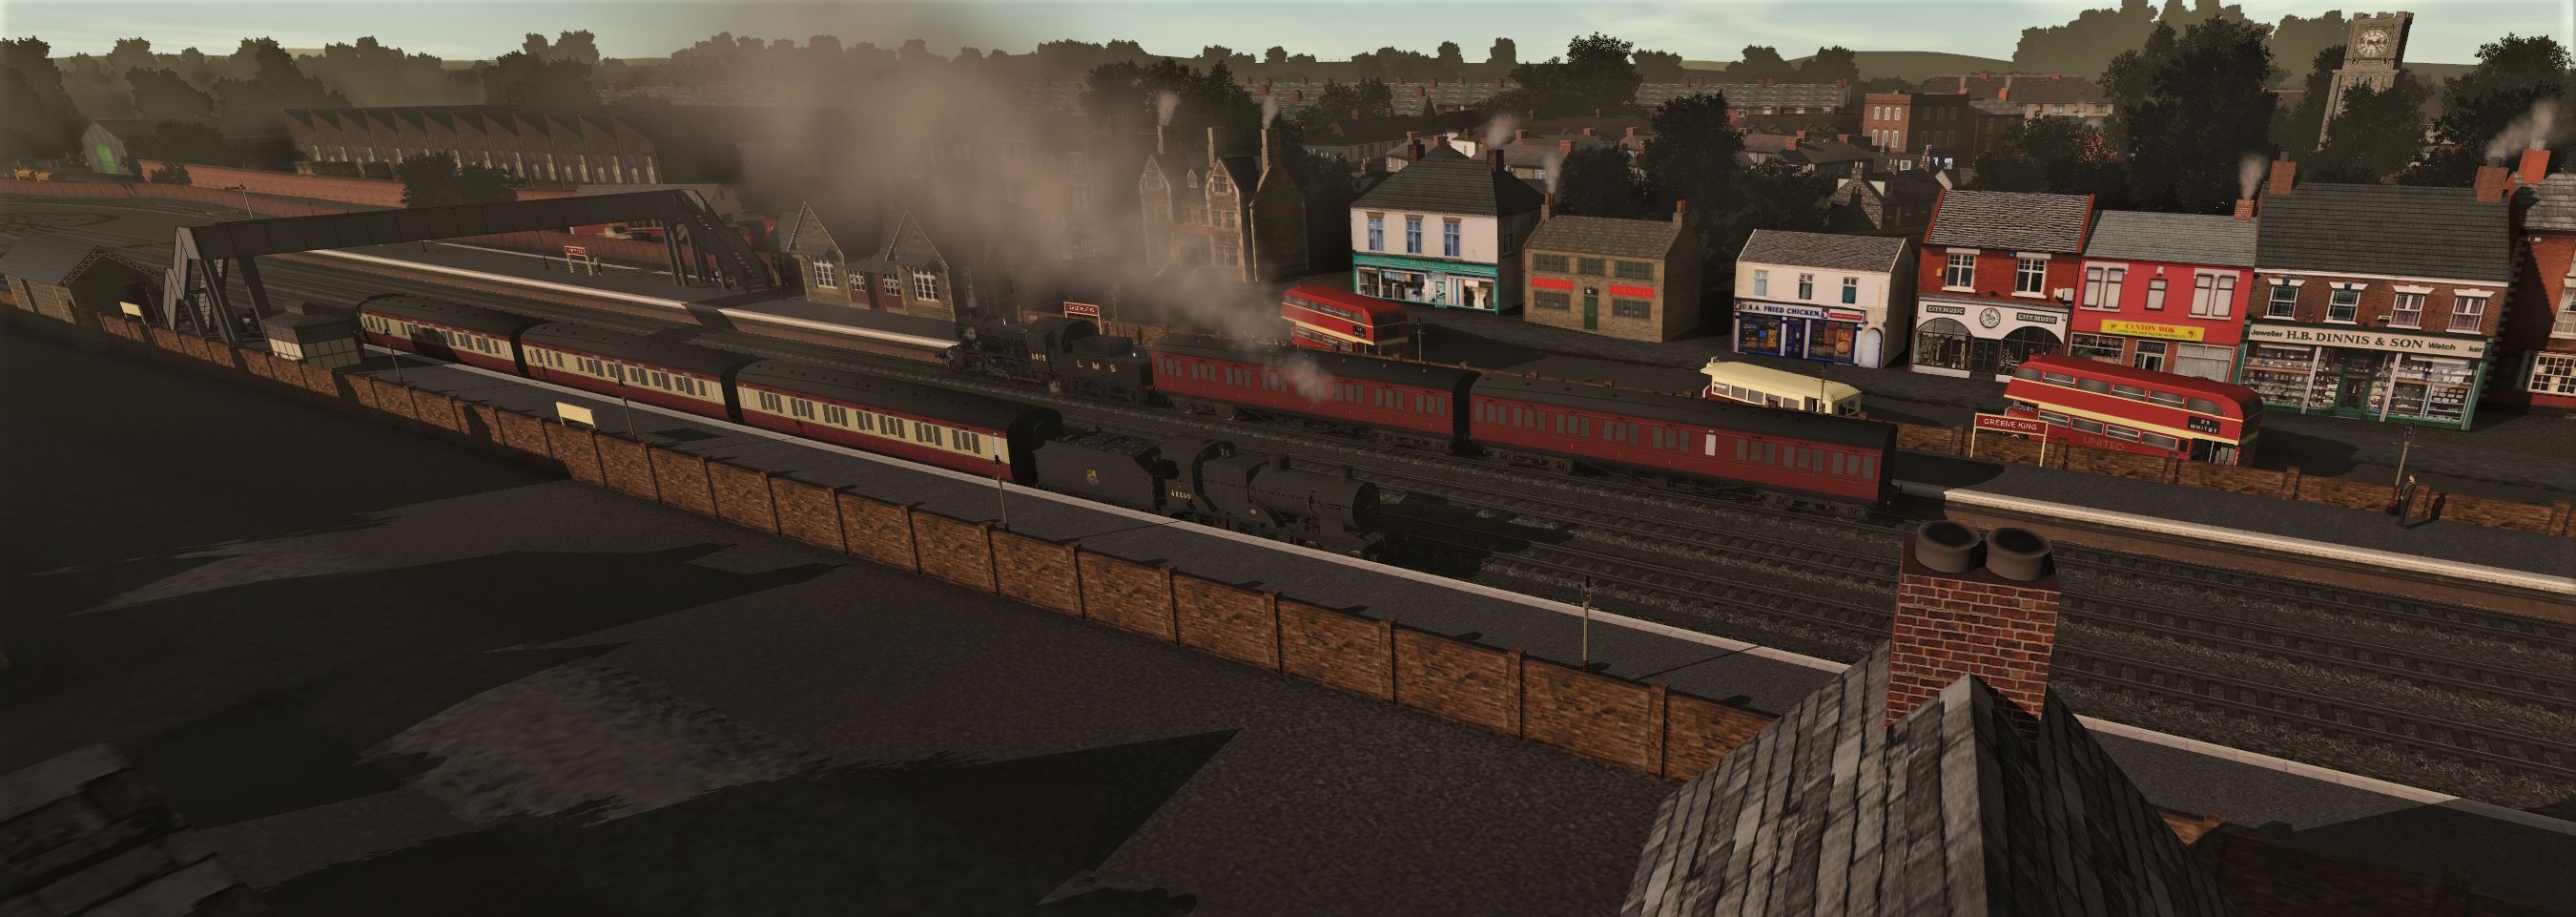 Badger-Tanglefoot---LMS-by-driver_col.jpg